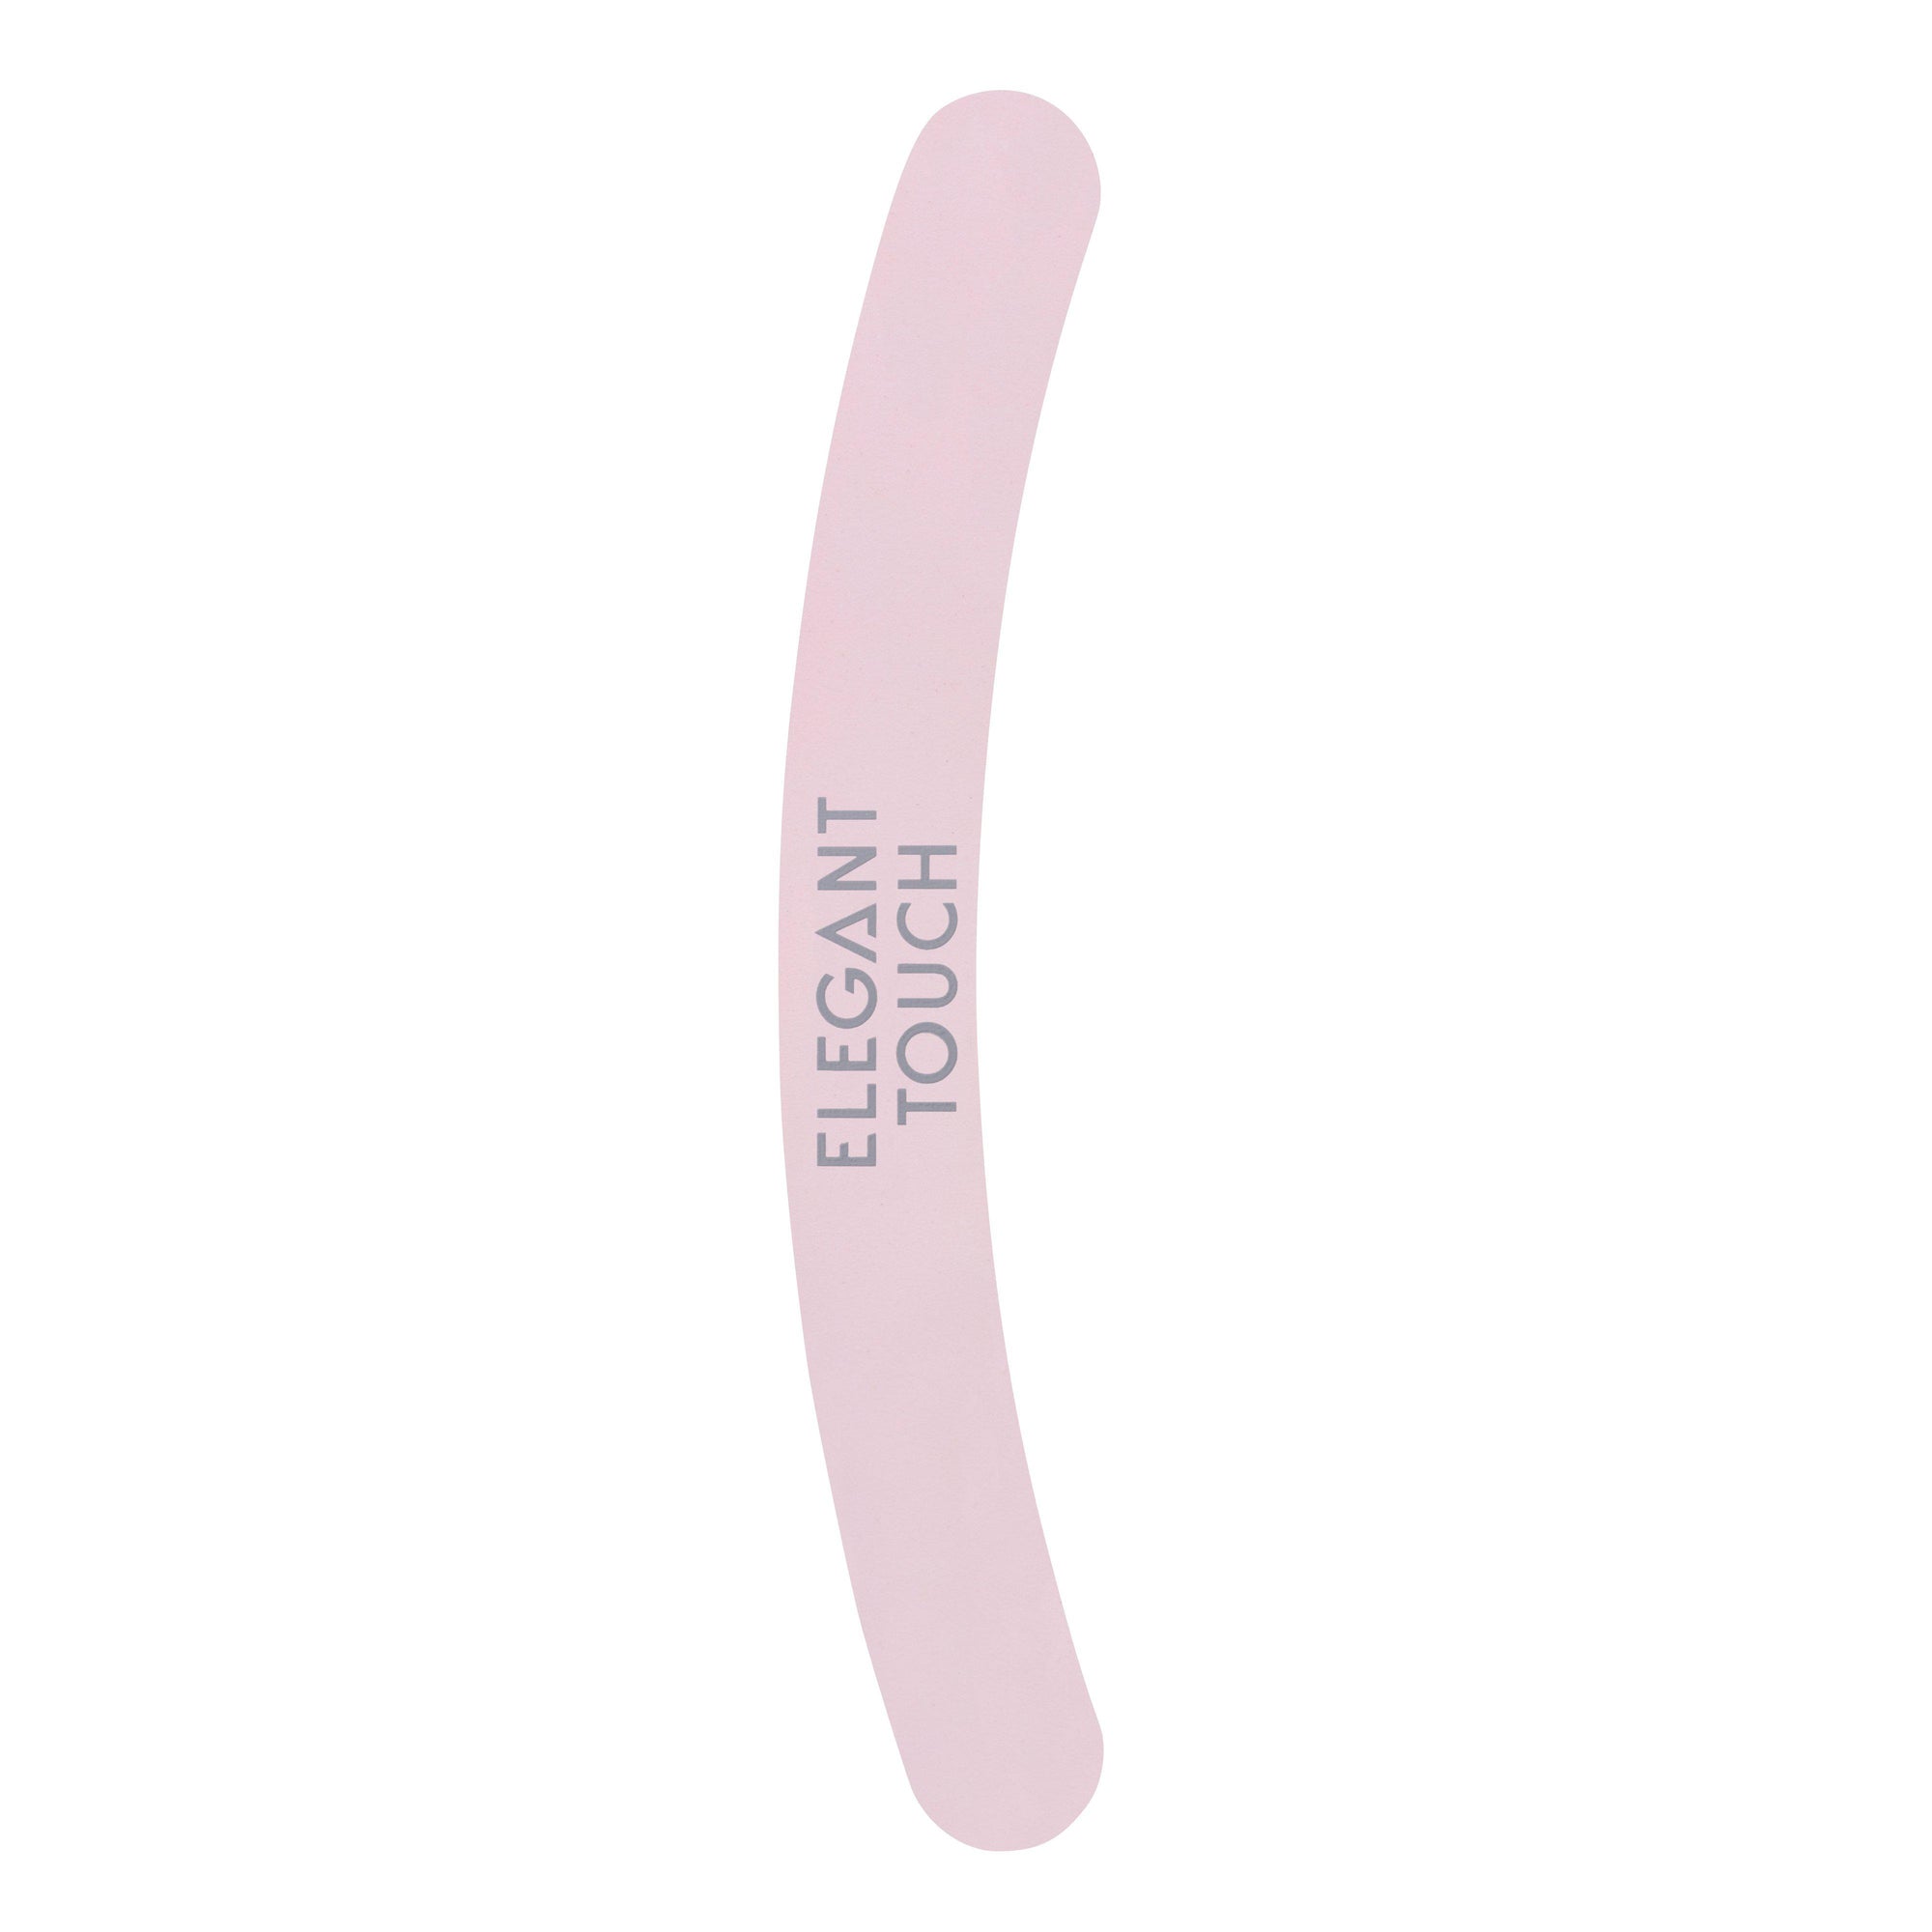 Elegant Touch Professional Nail Files